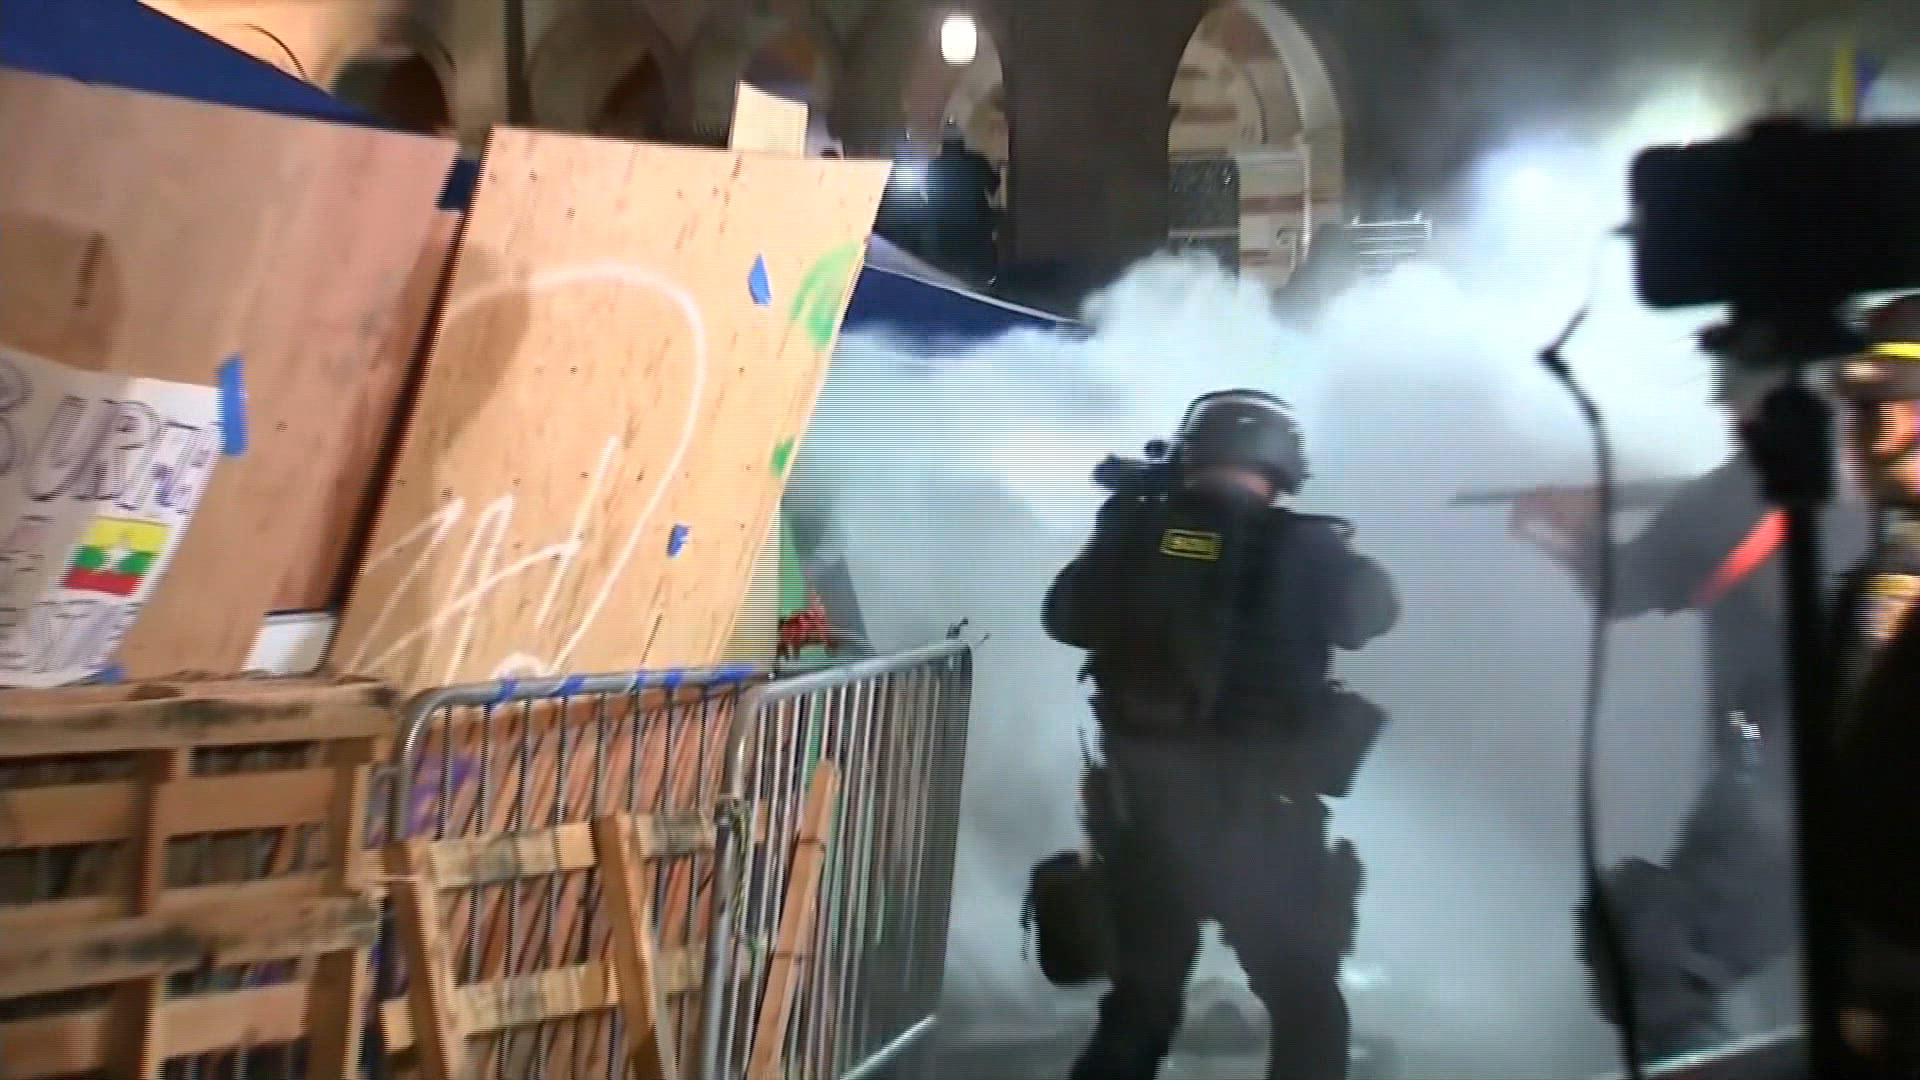 Police confronted protesters on the campus of UCLA after officials issued an order for them to disperse.